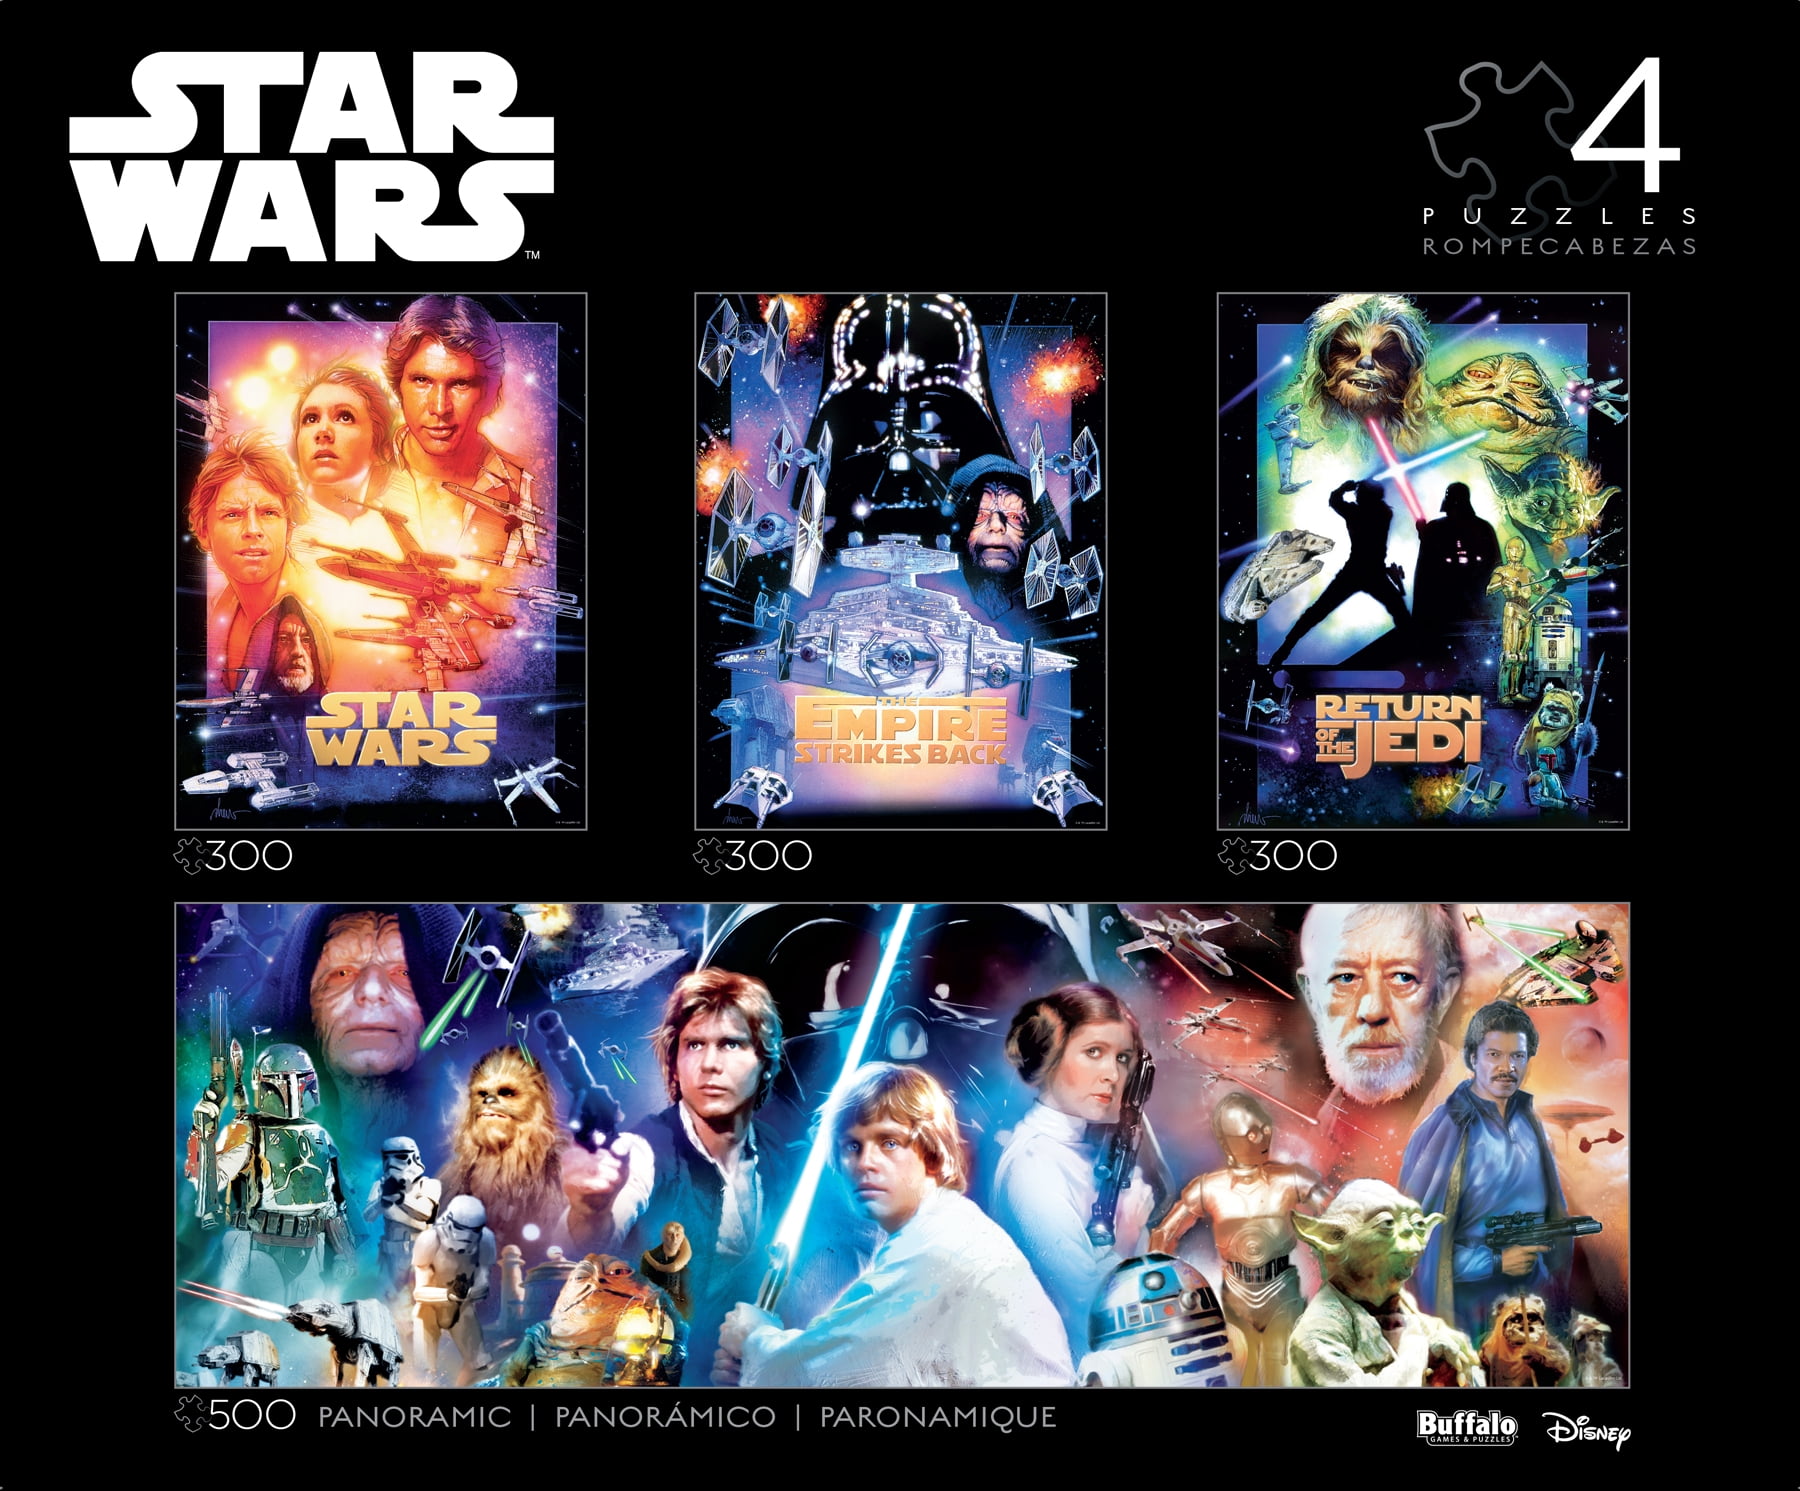 3 1 500 Piece Panoramic 300 & Star Wars 4 Puzzle Set Buffalo Games & Puzzles 